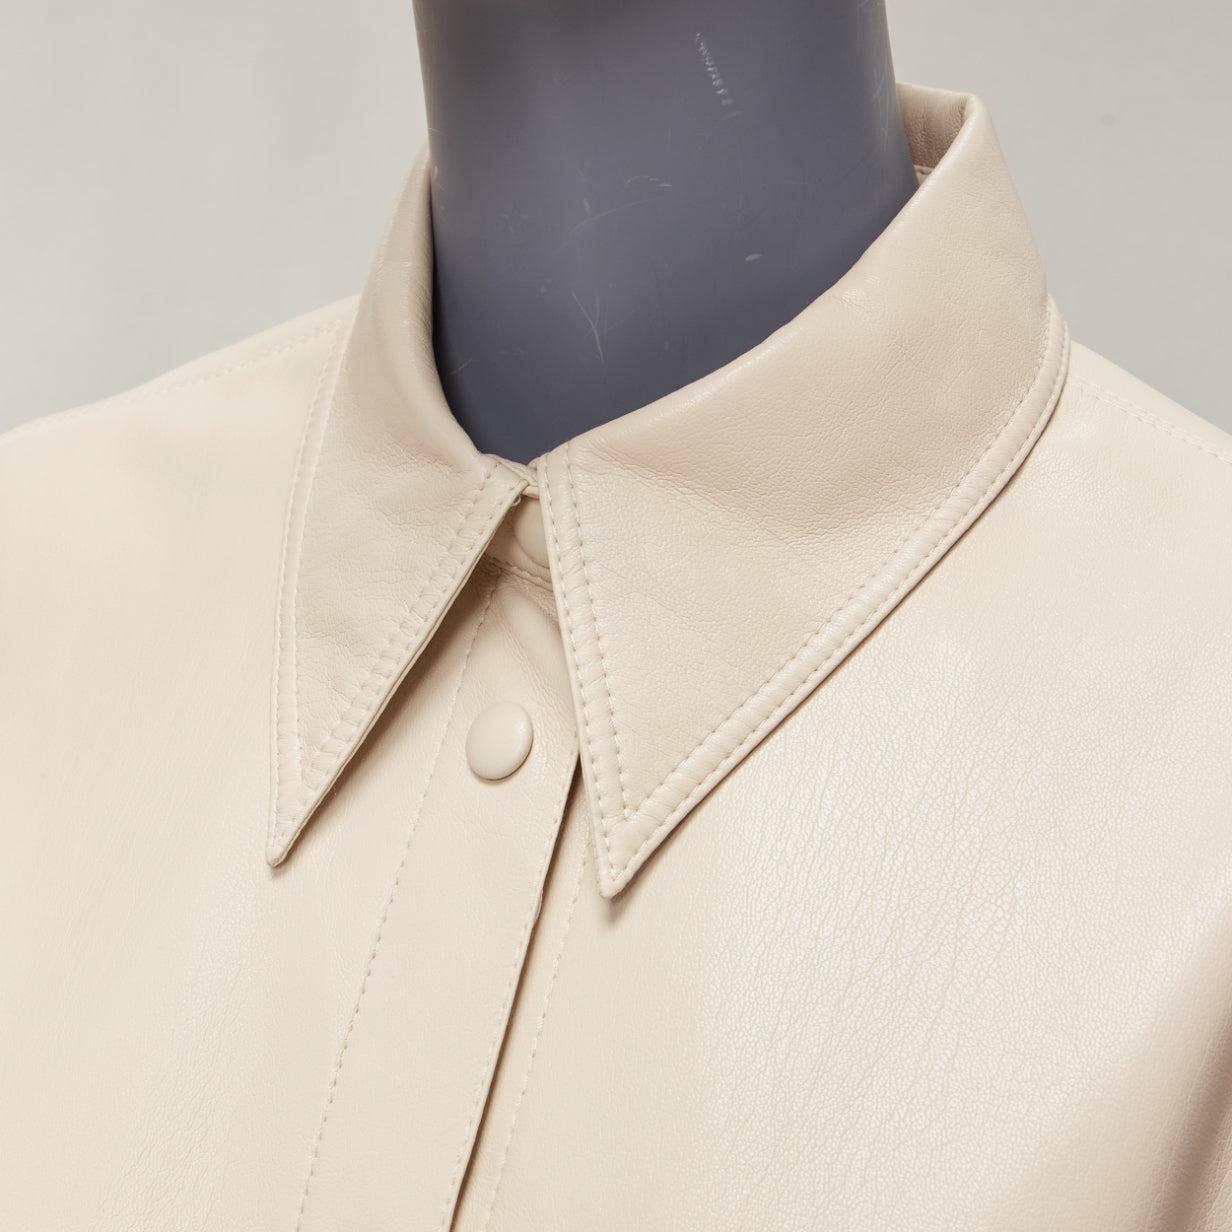 NANUSHKA stone beige vegan leather panels hidden placket minimal shirt XS
Reference: KYCG/A00023
Brand: Nanushka
Material: Faux Leather
Color: Beige
Pattern: Solid
Closure: Button
Extra Details: Hidden plackets.
Made in: